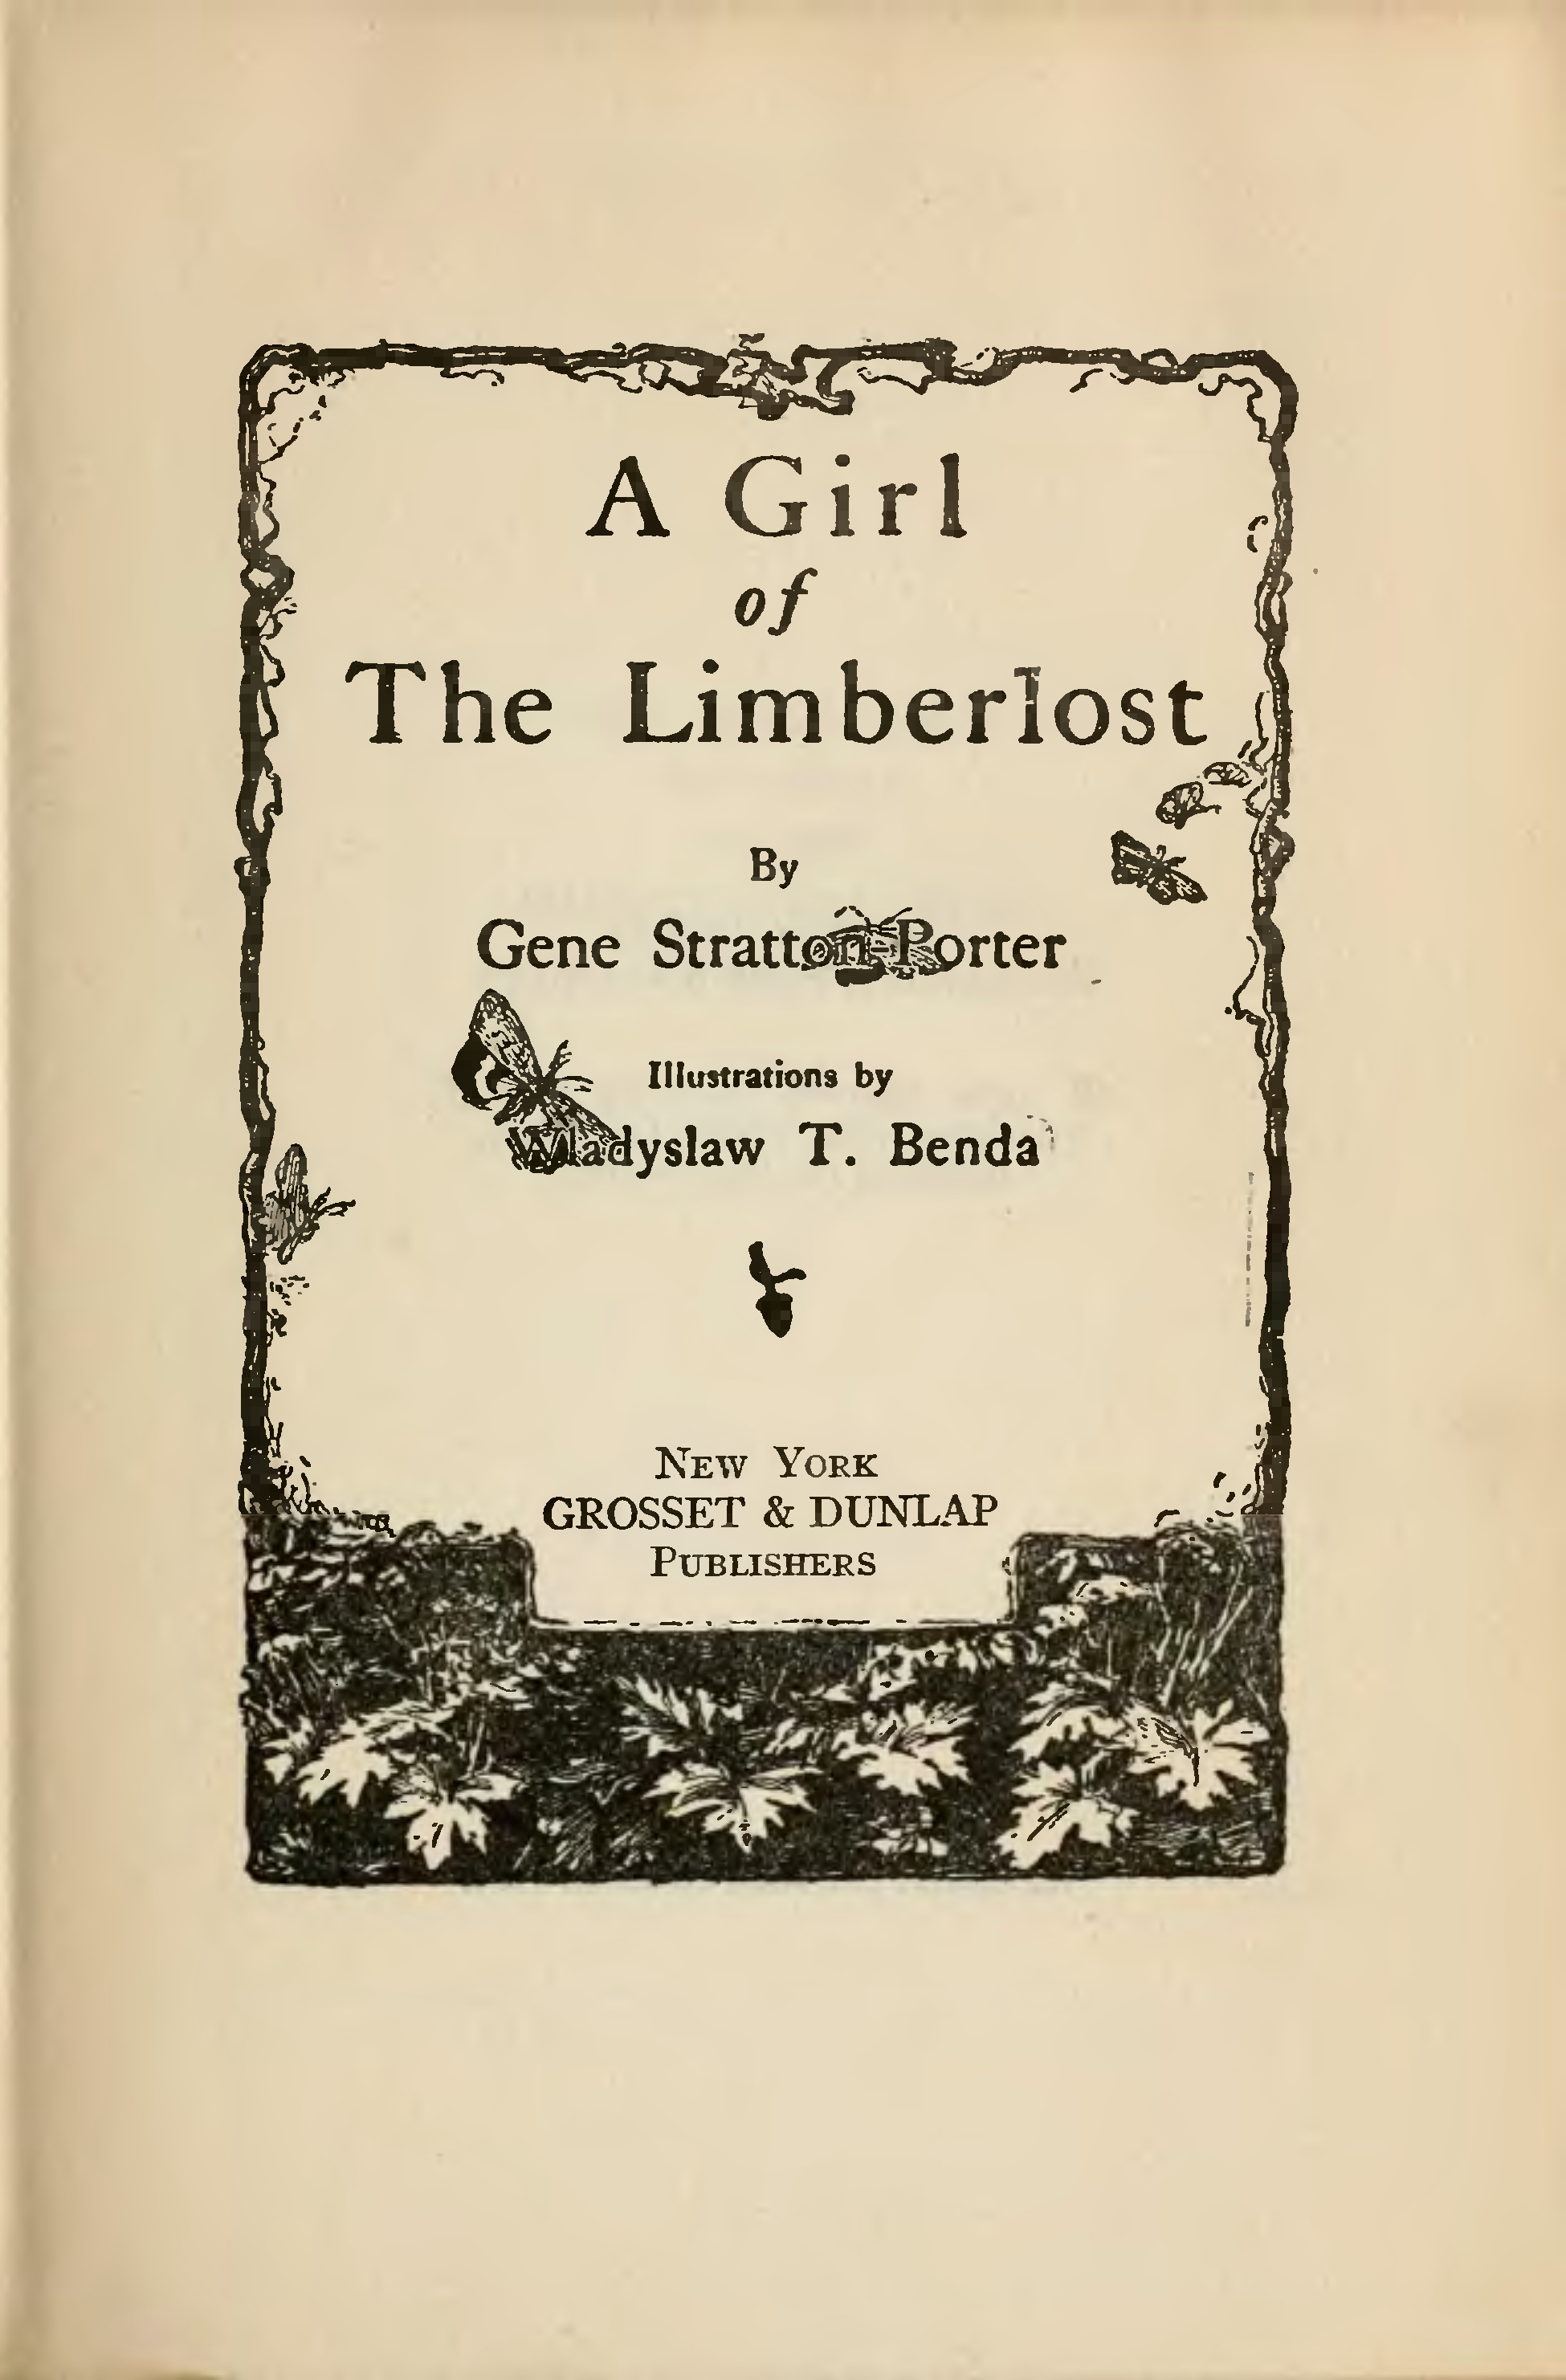 https://upload.wikimedia.org/wikipedia/commons/2/26/Girl_of_the_Limberlost_Title_page.png